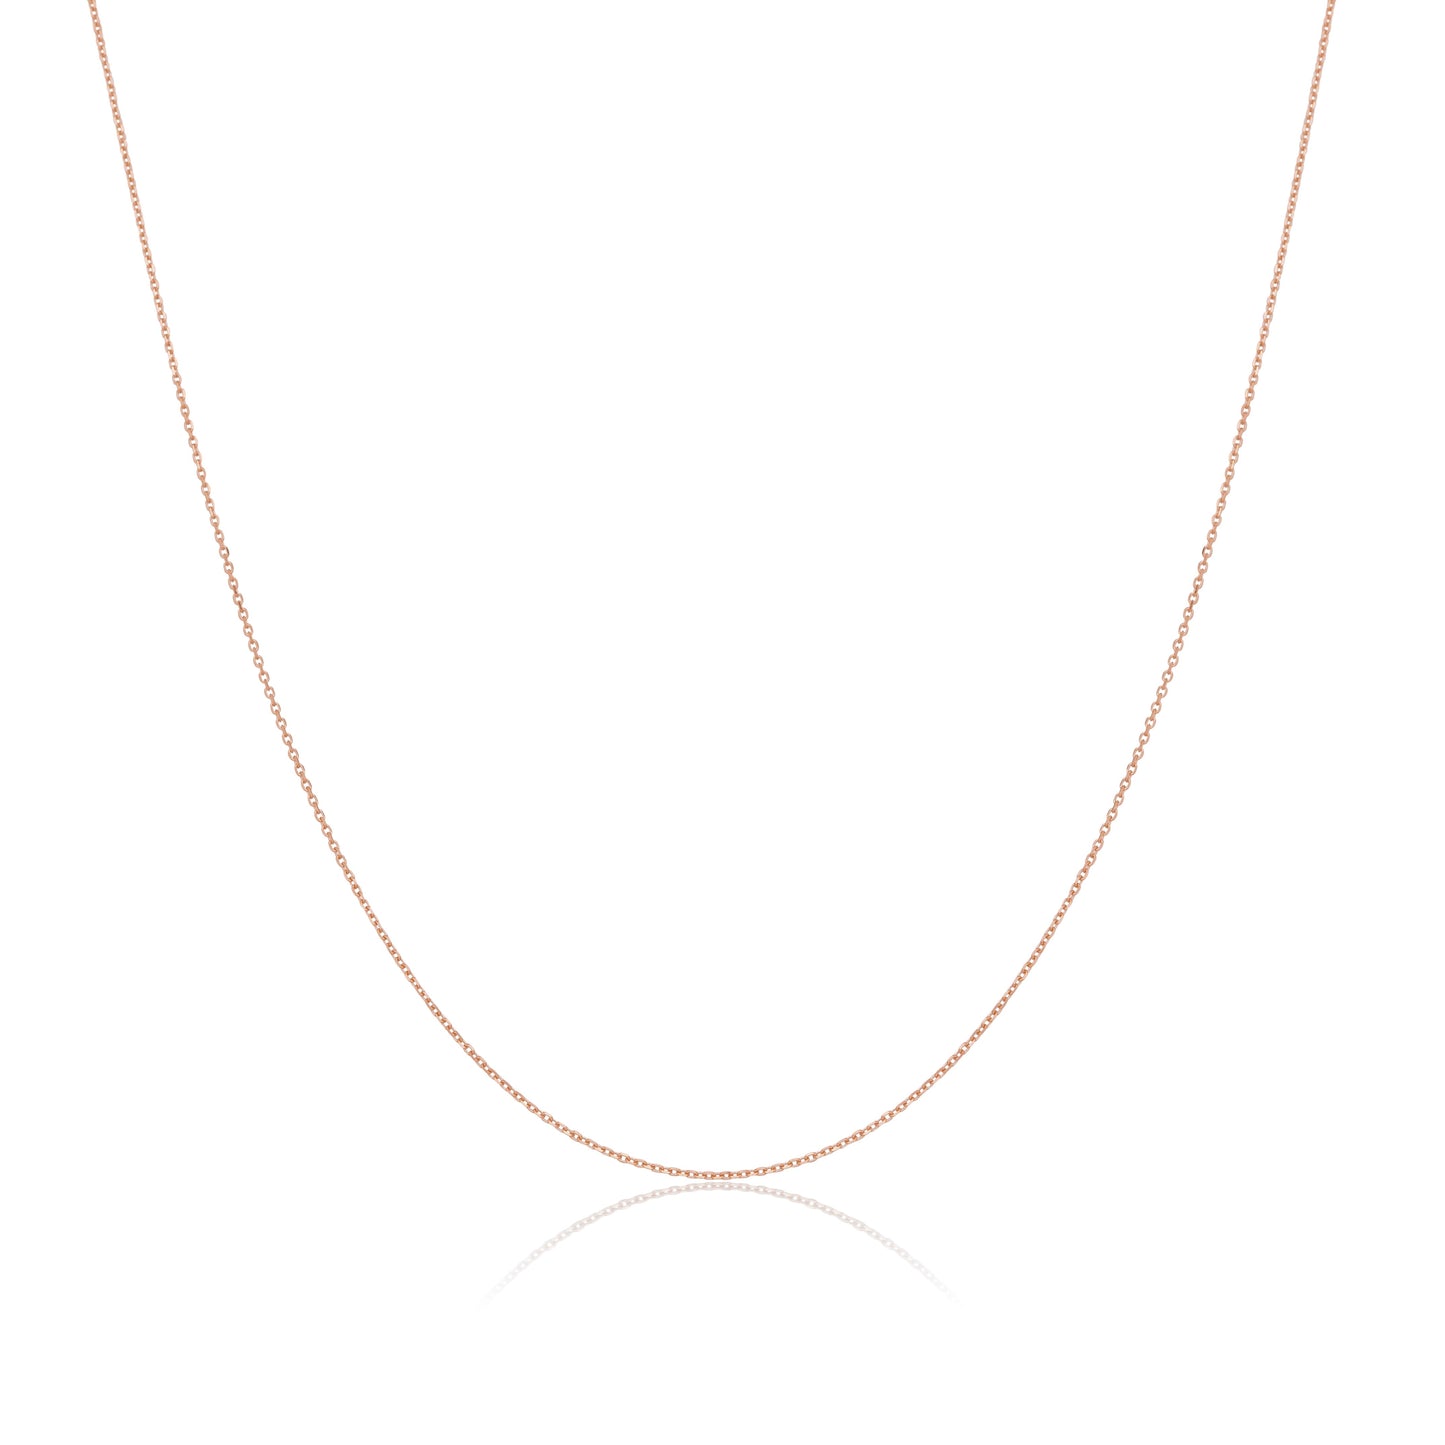 9ct Rose Gold Faceted Trace Chain 16 - 22 Inches